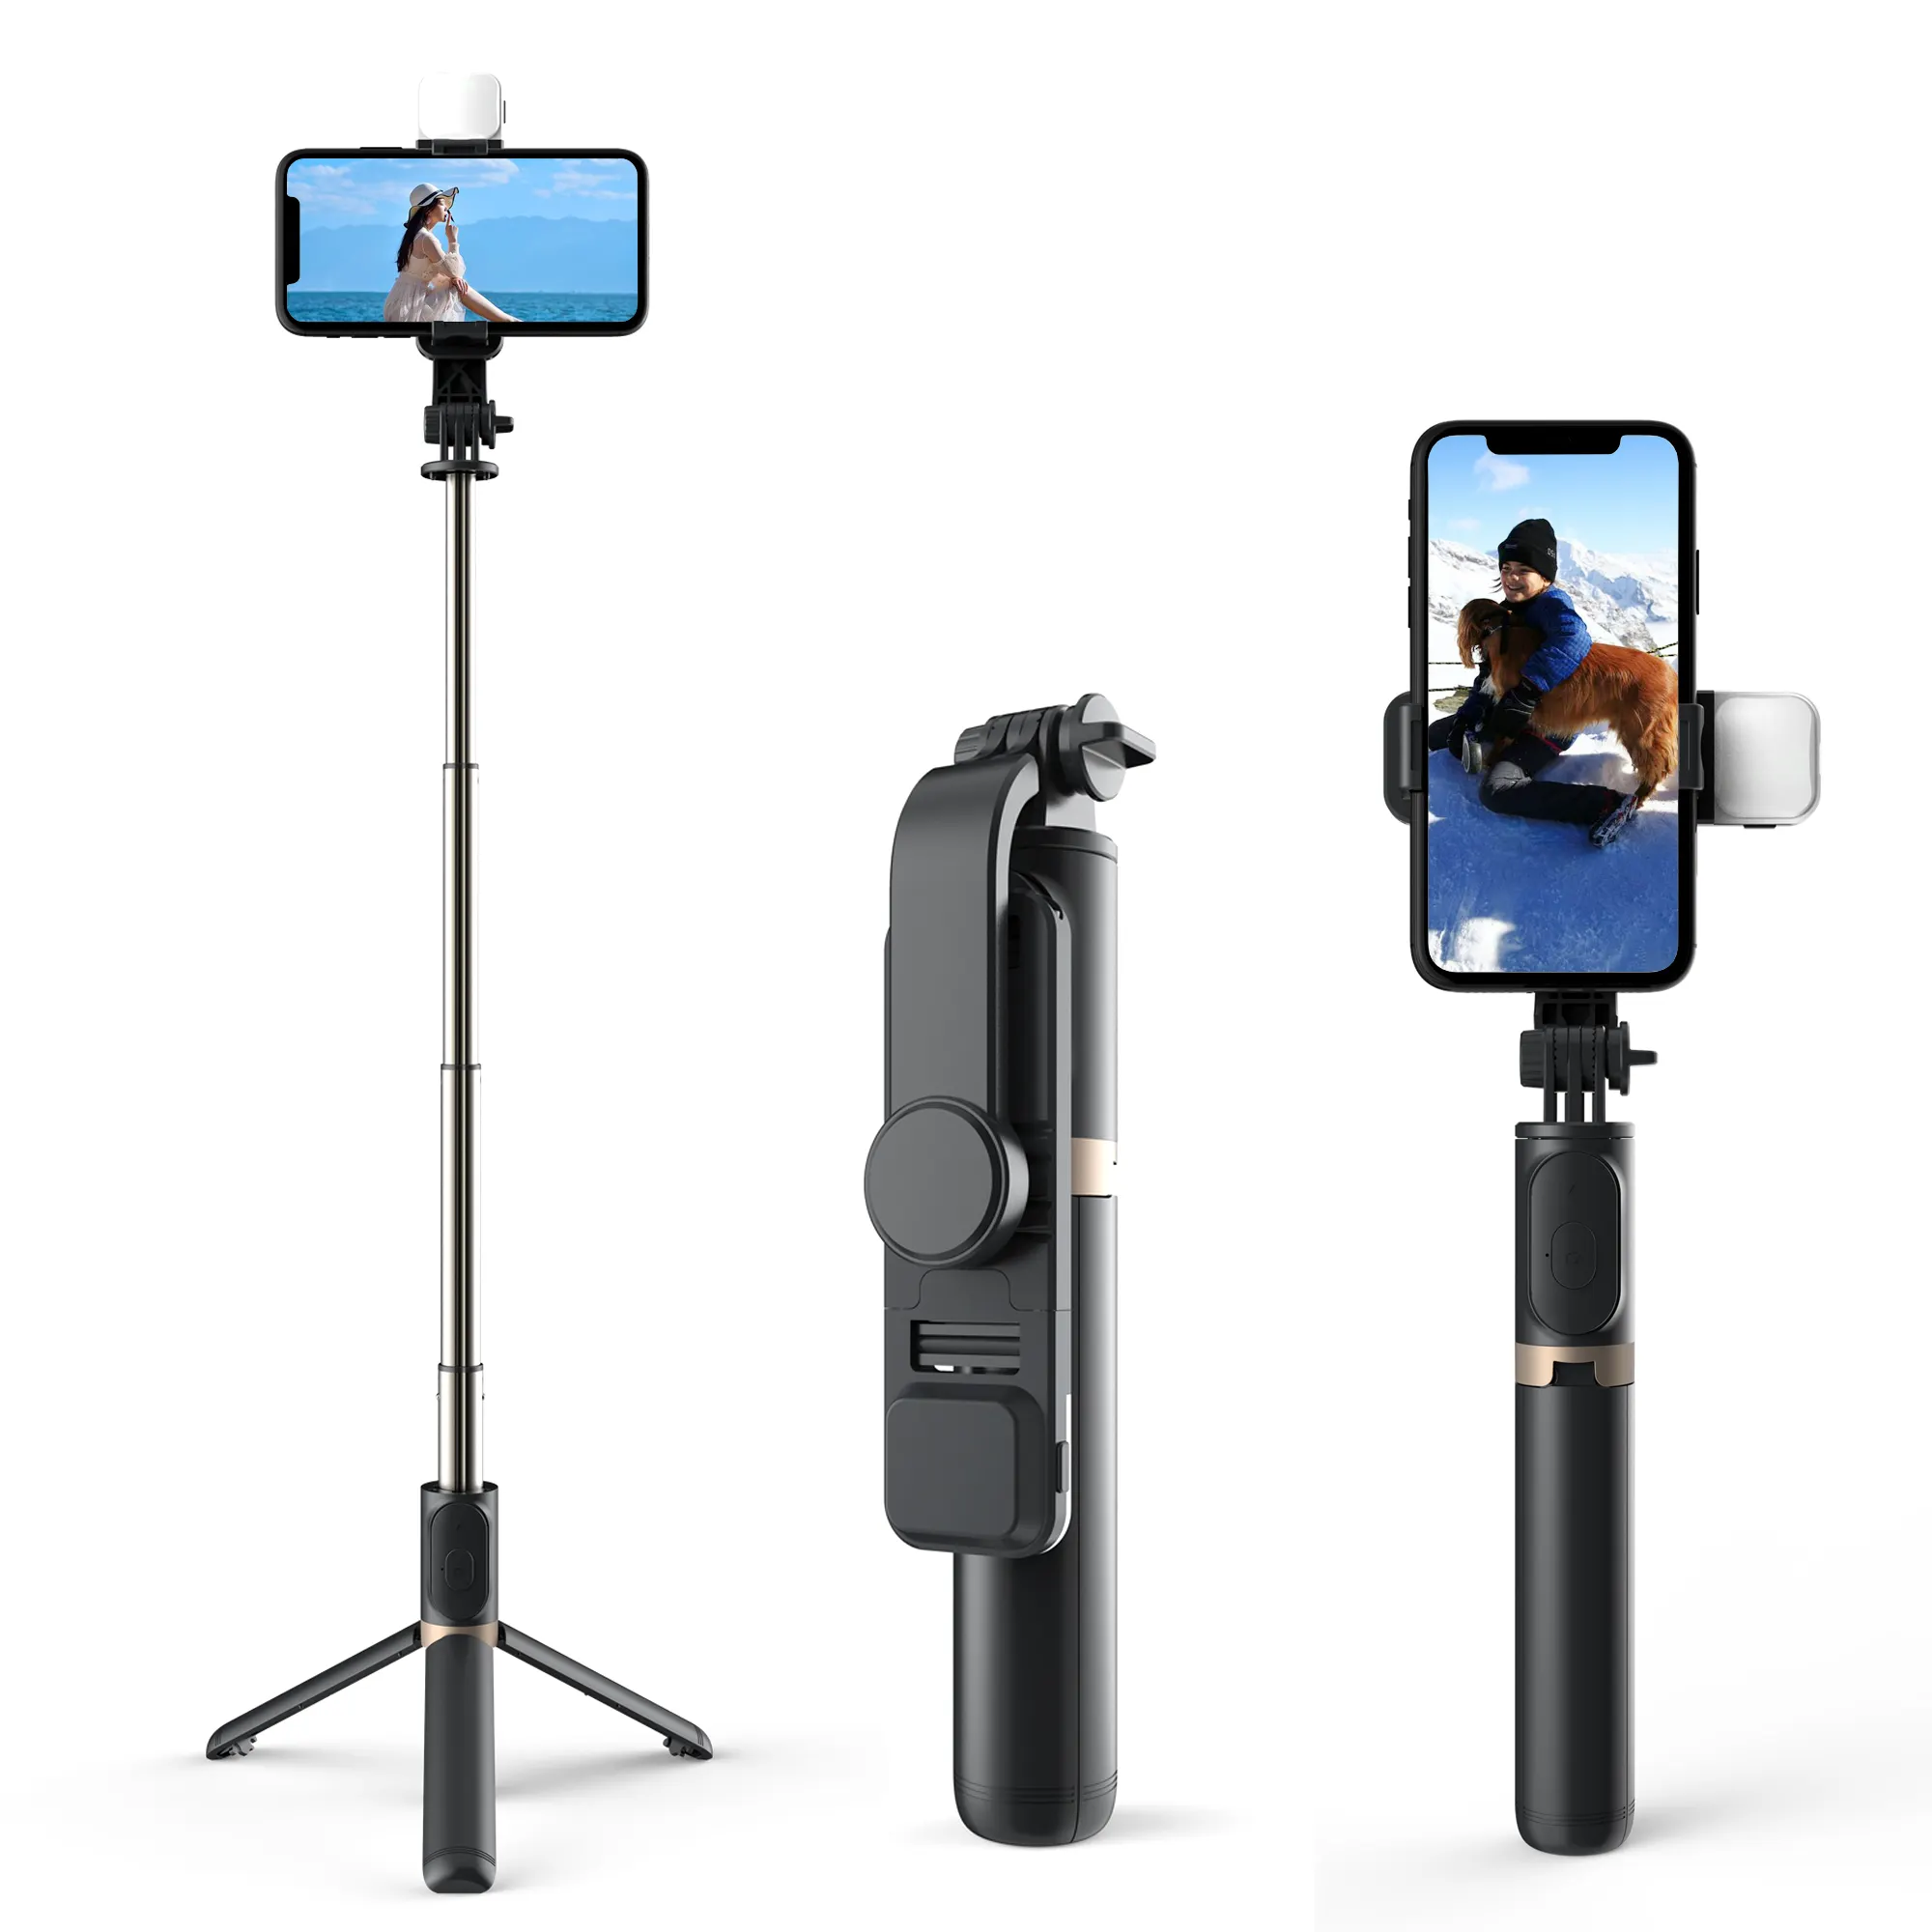 Tripod selfie stick comes with a tripod without disassembly, one live outdoor camera mini stand